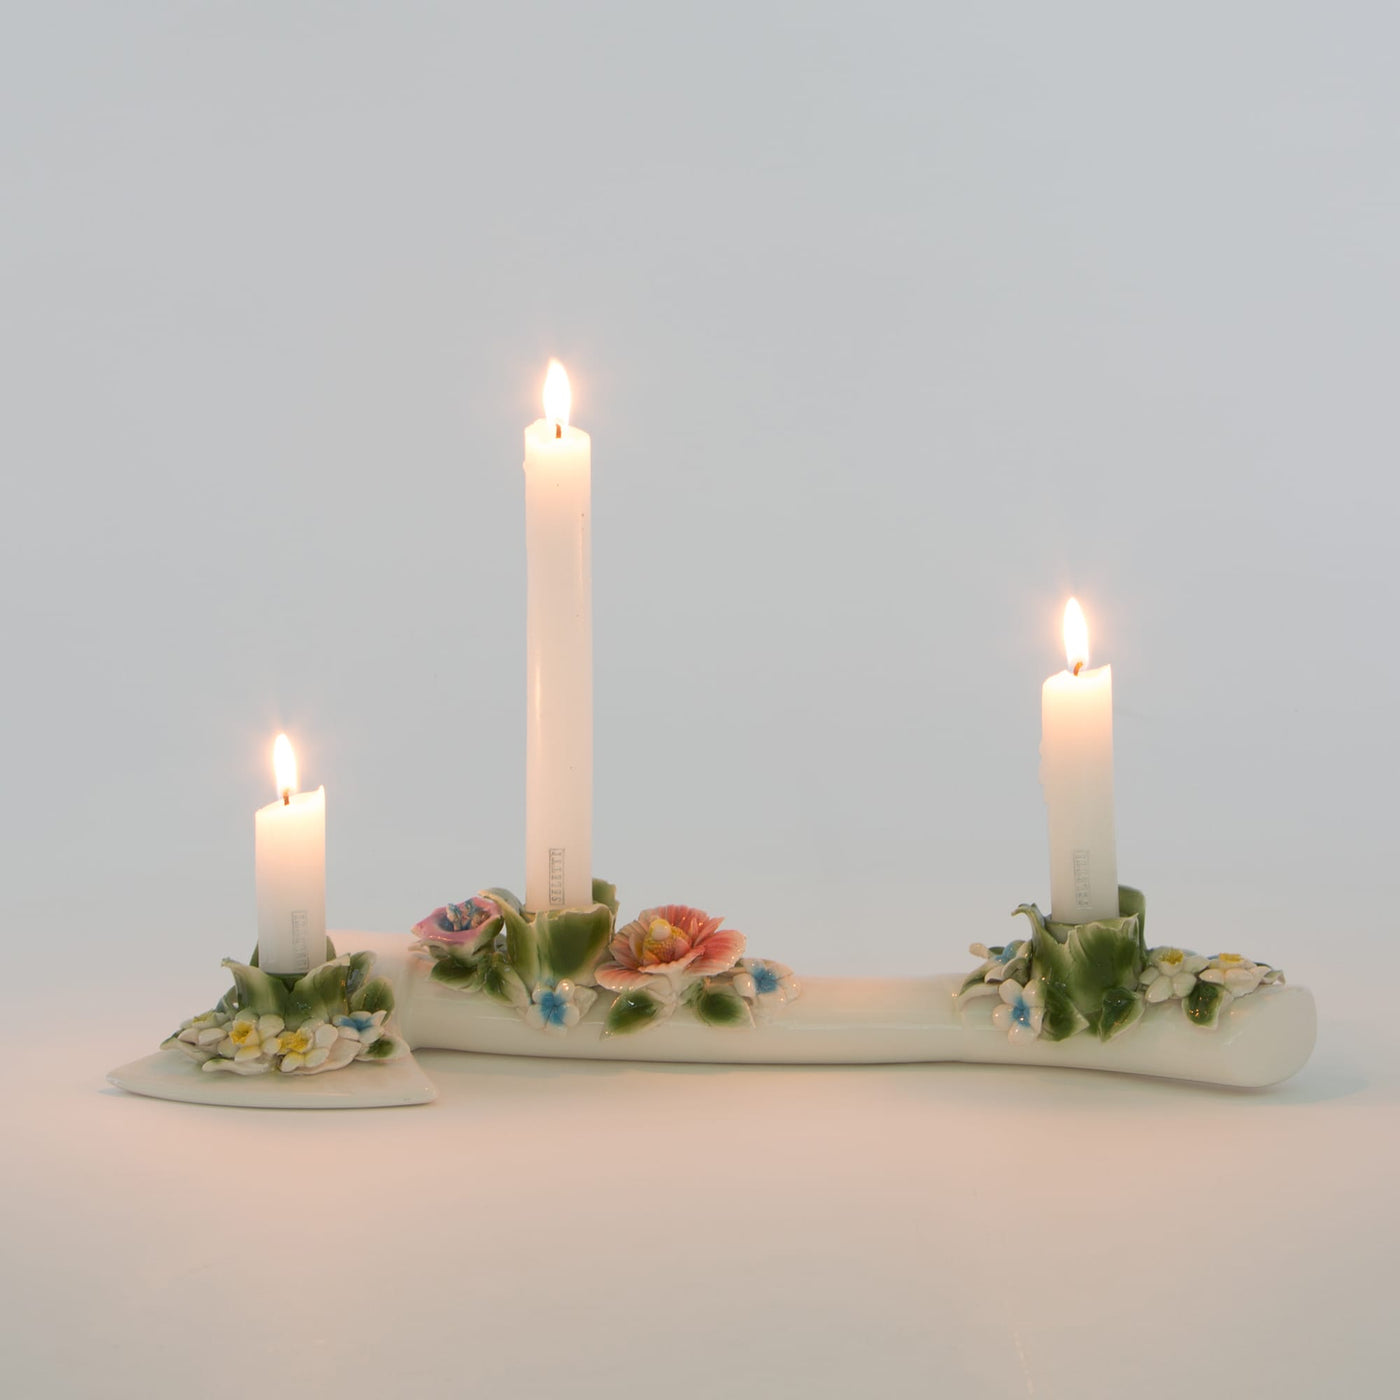 The Axe Ceramic Flower Candle Holder